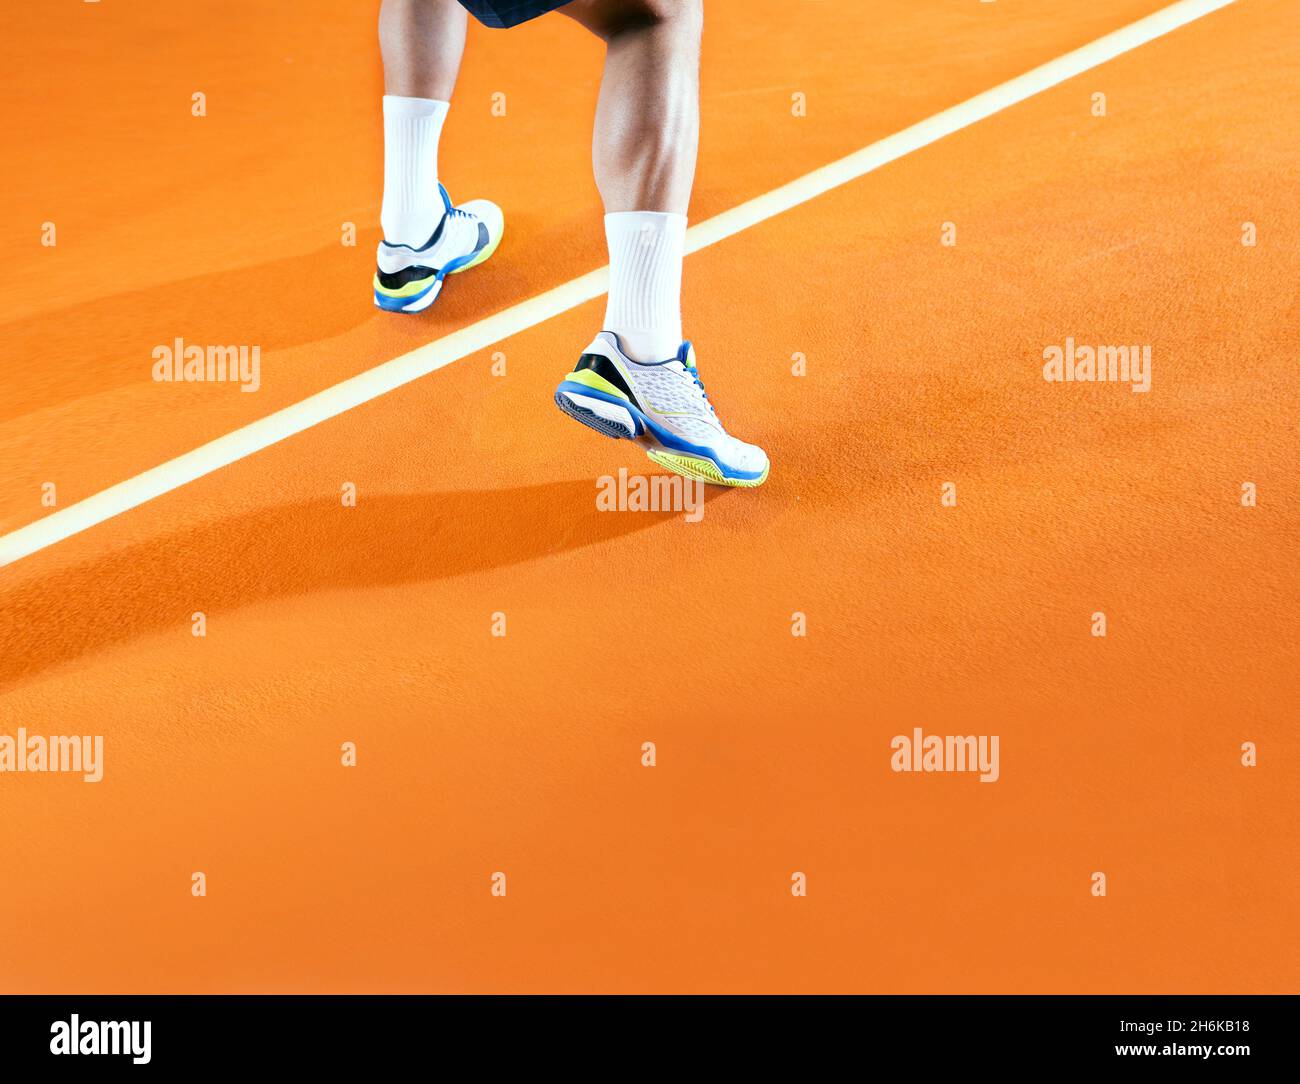 Male tennis player in action on orange court Stock Photo